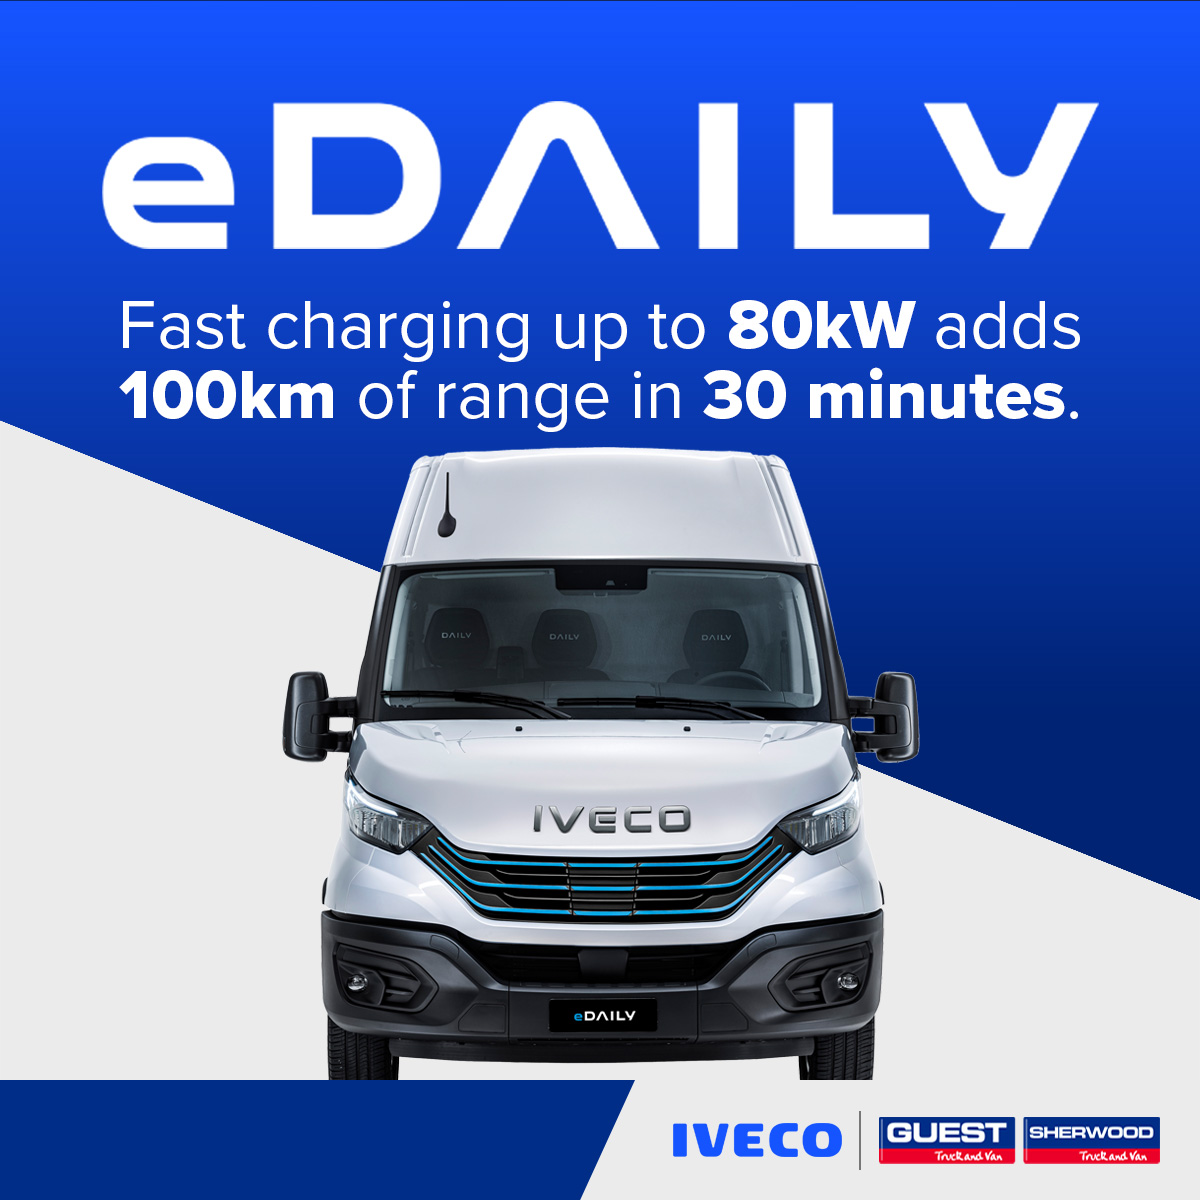 The new Iveco eDaily can charge in 30 minutes with a rapid charger.
Call our sales team on 0121 553 2737 or visit guesttruckandvan.co.uk/new-iveco-edai… to find out more. 

#guest #sherwood #iveco #truck #van #ivecodaily #ivecosway #ivecostralis #ivecoxway #ivecoedaily #electric #evvehicles